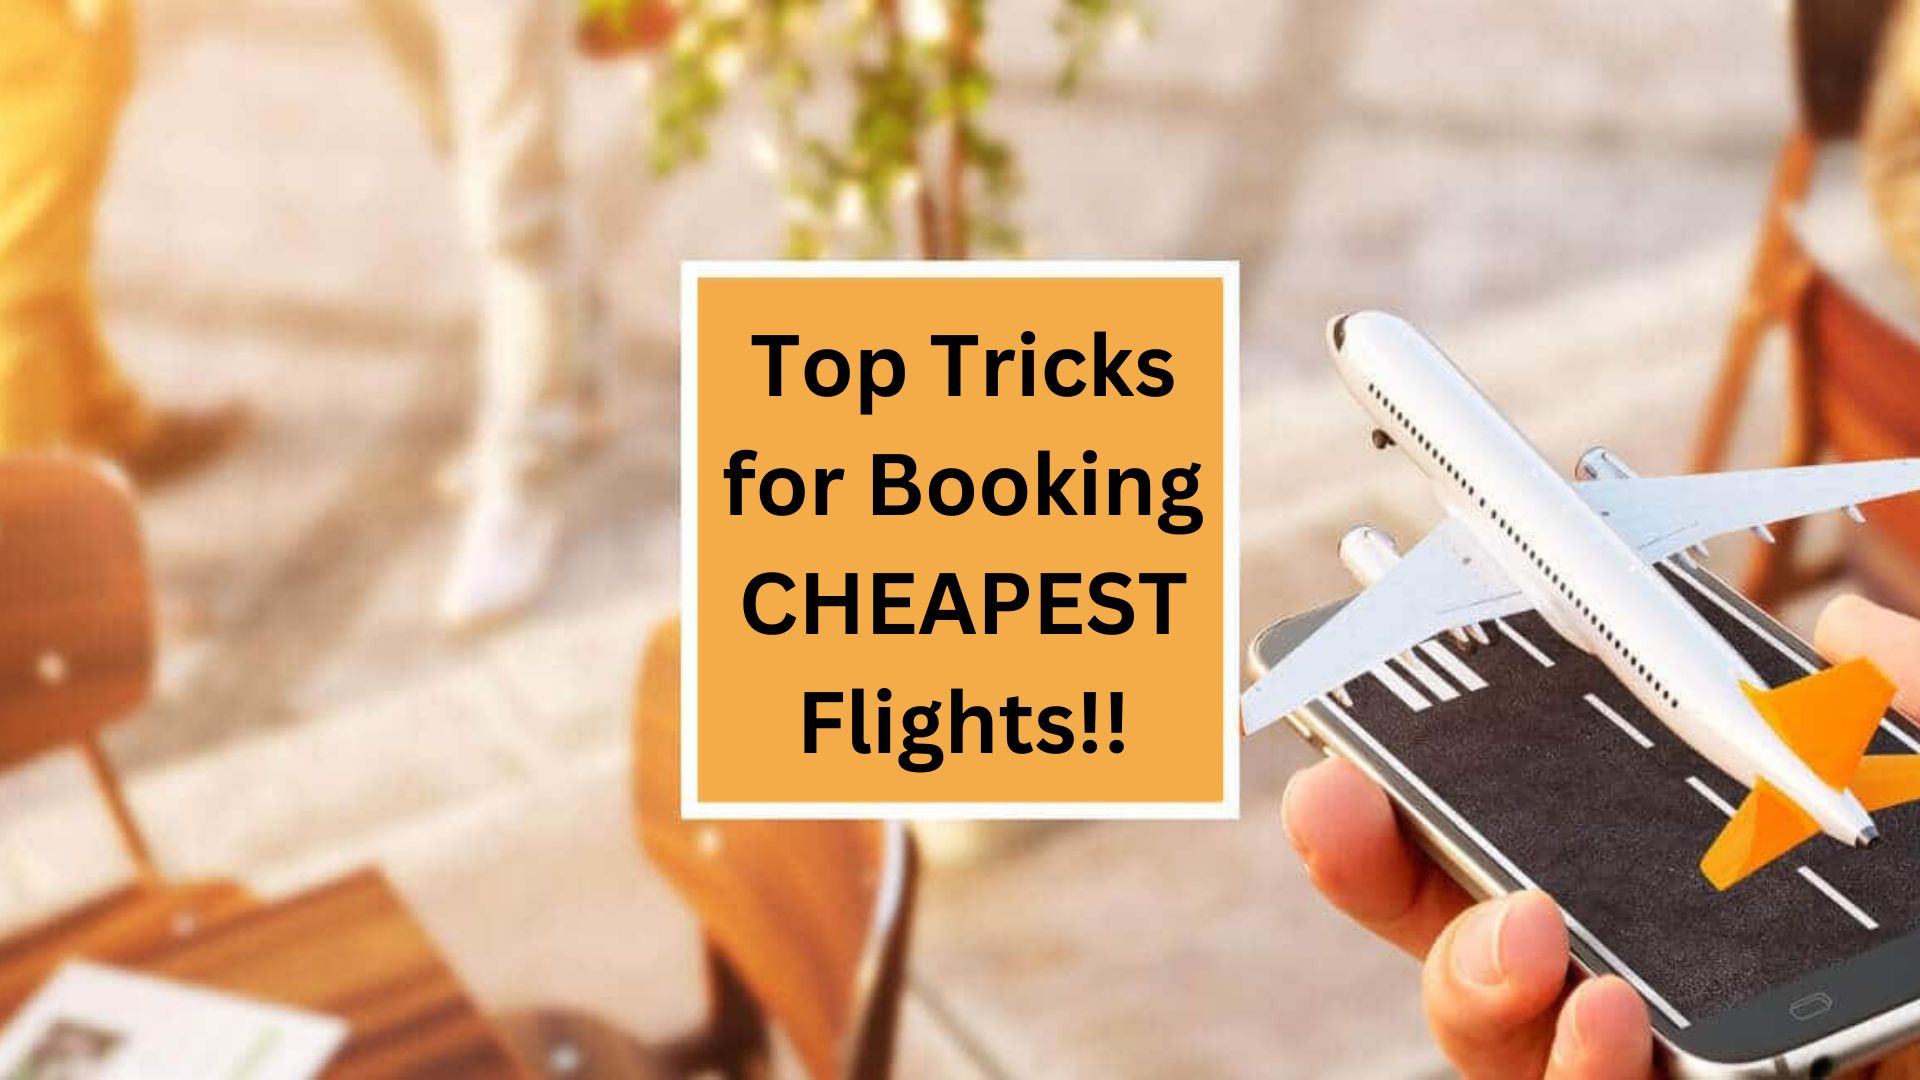 Top Tricks for Booking CHEAP Flights